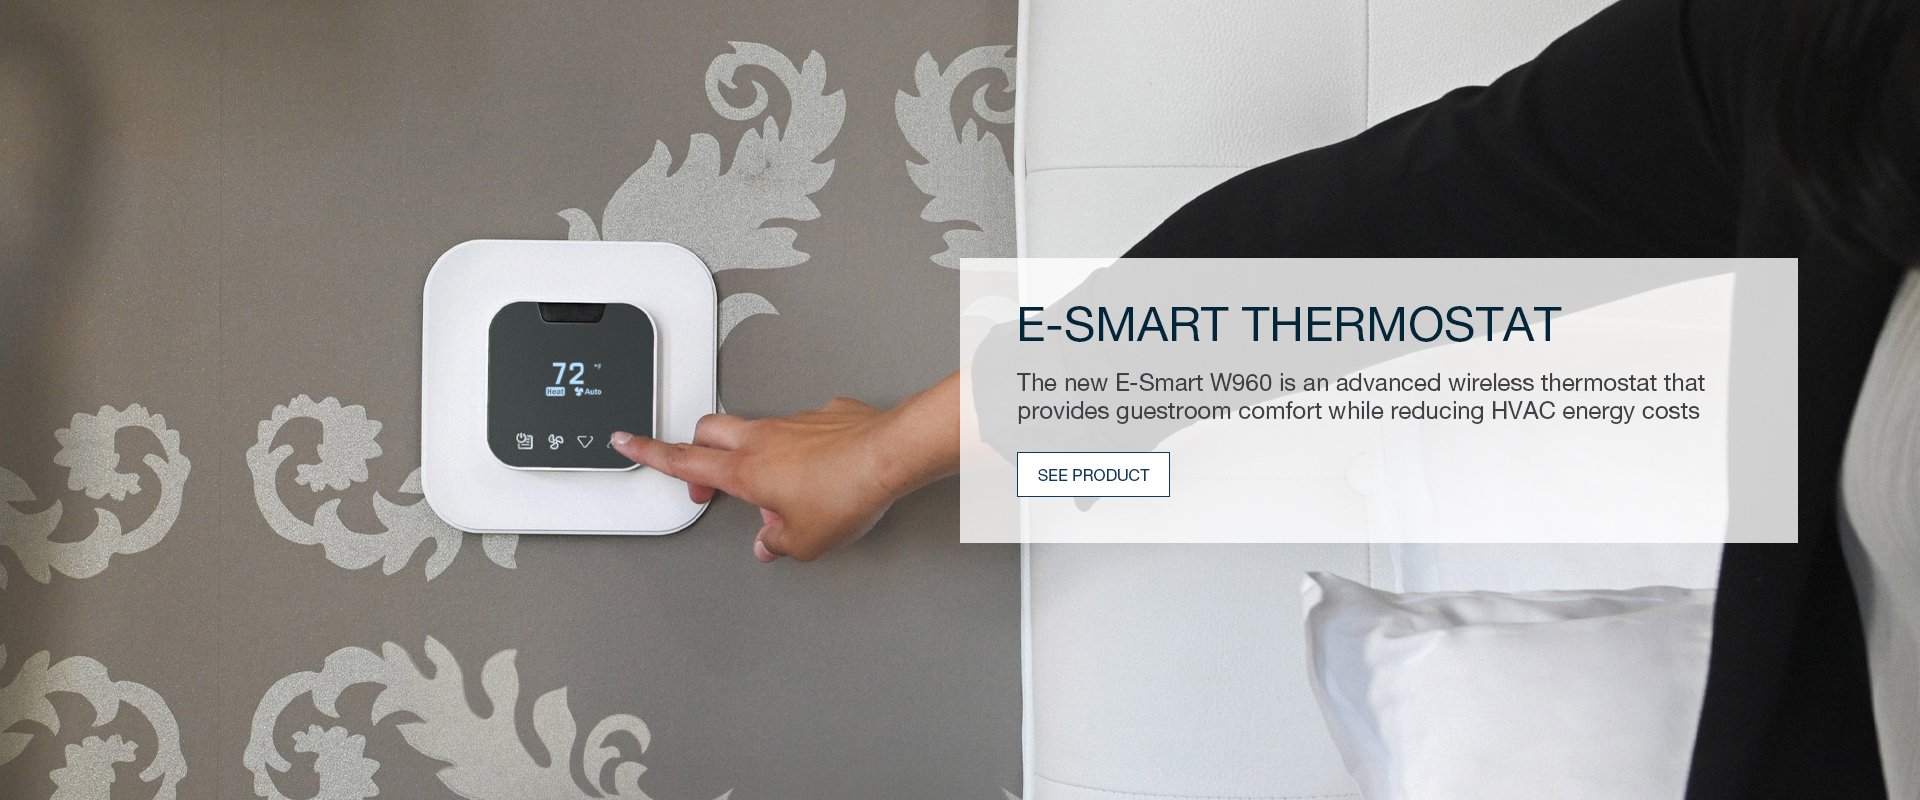 E-SMART Thermostat - The new E-Smart W960 is an advanced wireless thermostat that provides guestroom comfort while reducing HVAC energy costs